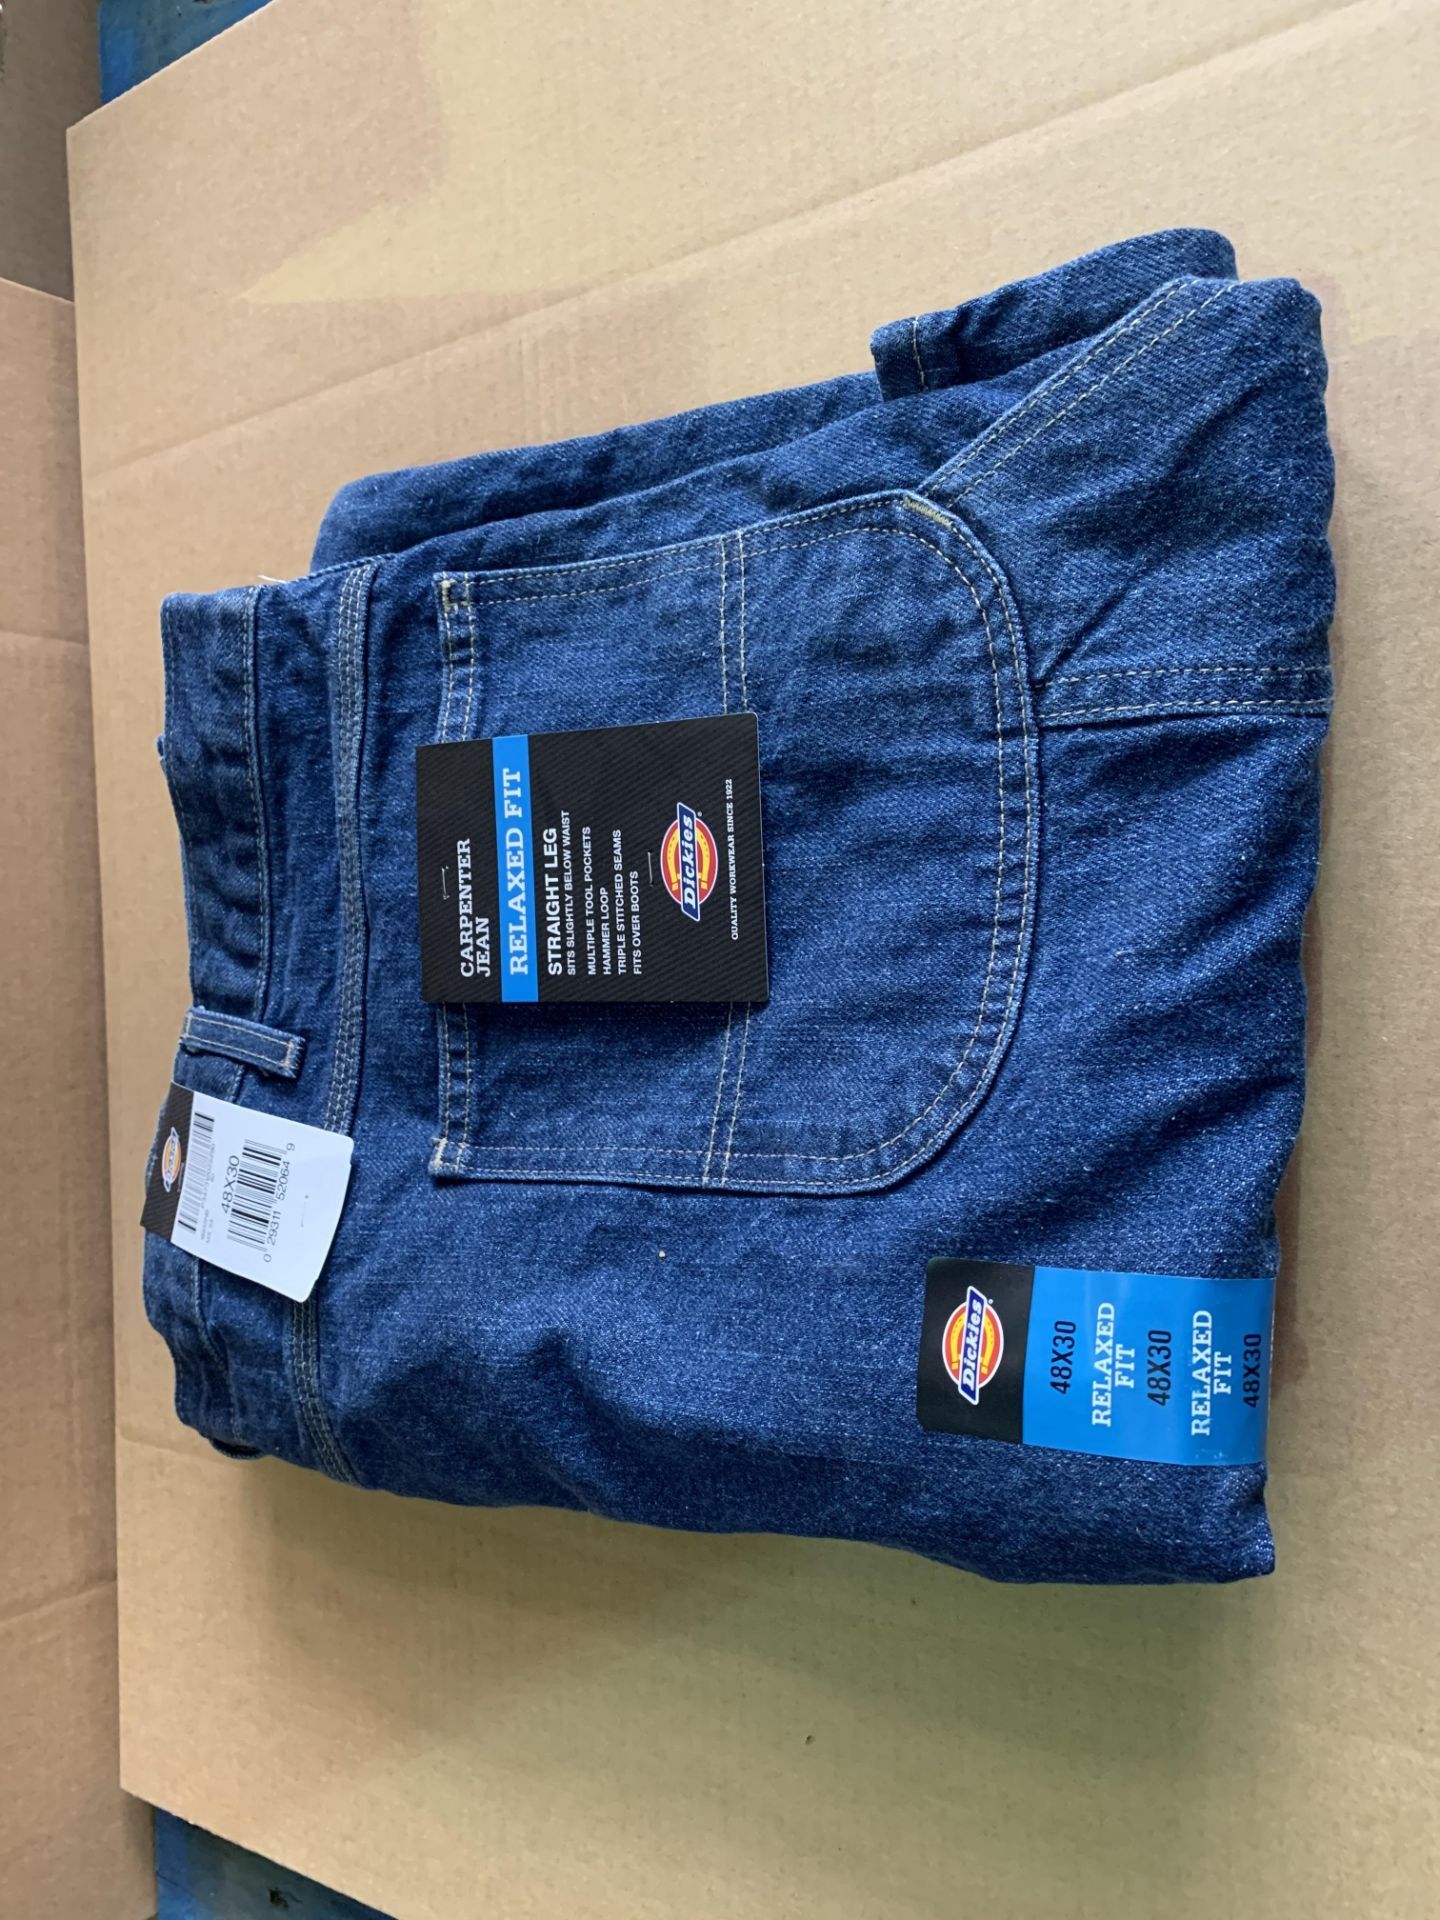 8 X BRAND NEW DICKIES RELAXED FIT STRAIGHT LEG CARPENTER JEANS SIZE 48 X 30 (711/1)